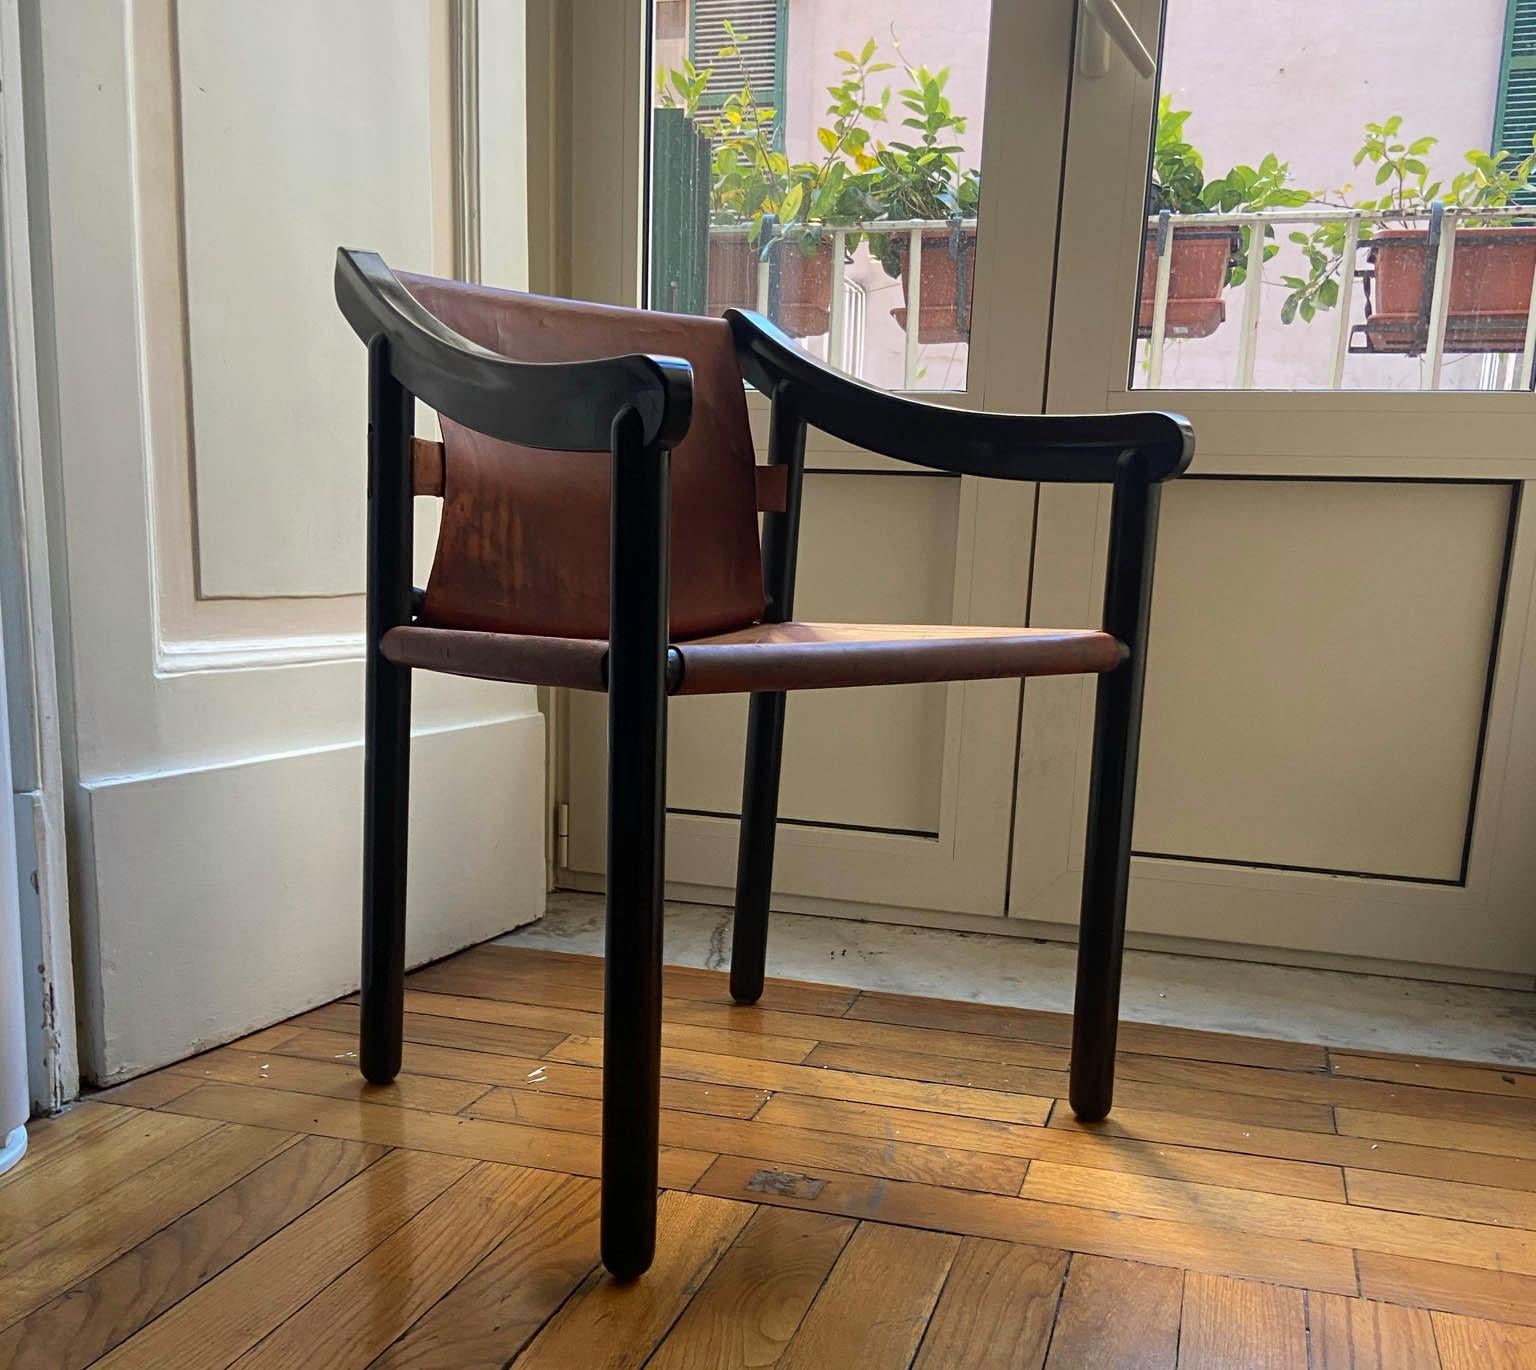 Vico Magistretti for Cassina, '905' armchair, black lacquered wood and leather, Italy, design, 1960s.

The elegant of the frame features cylindrical legs and curved arms. The design stands out due the self-supporting seat, made from one piece of